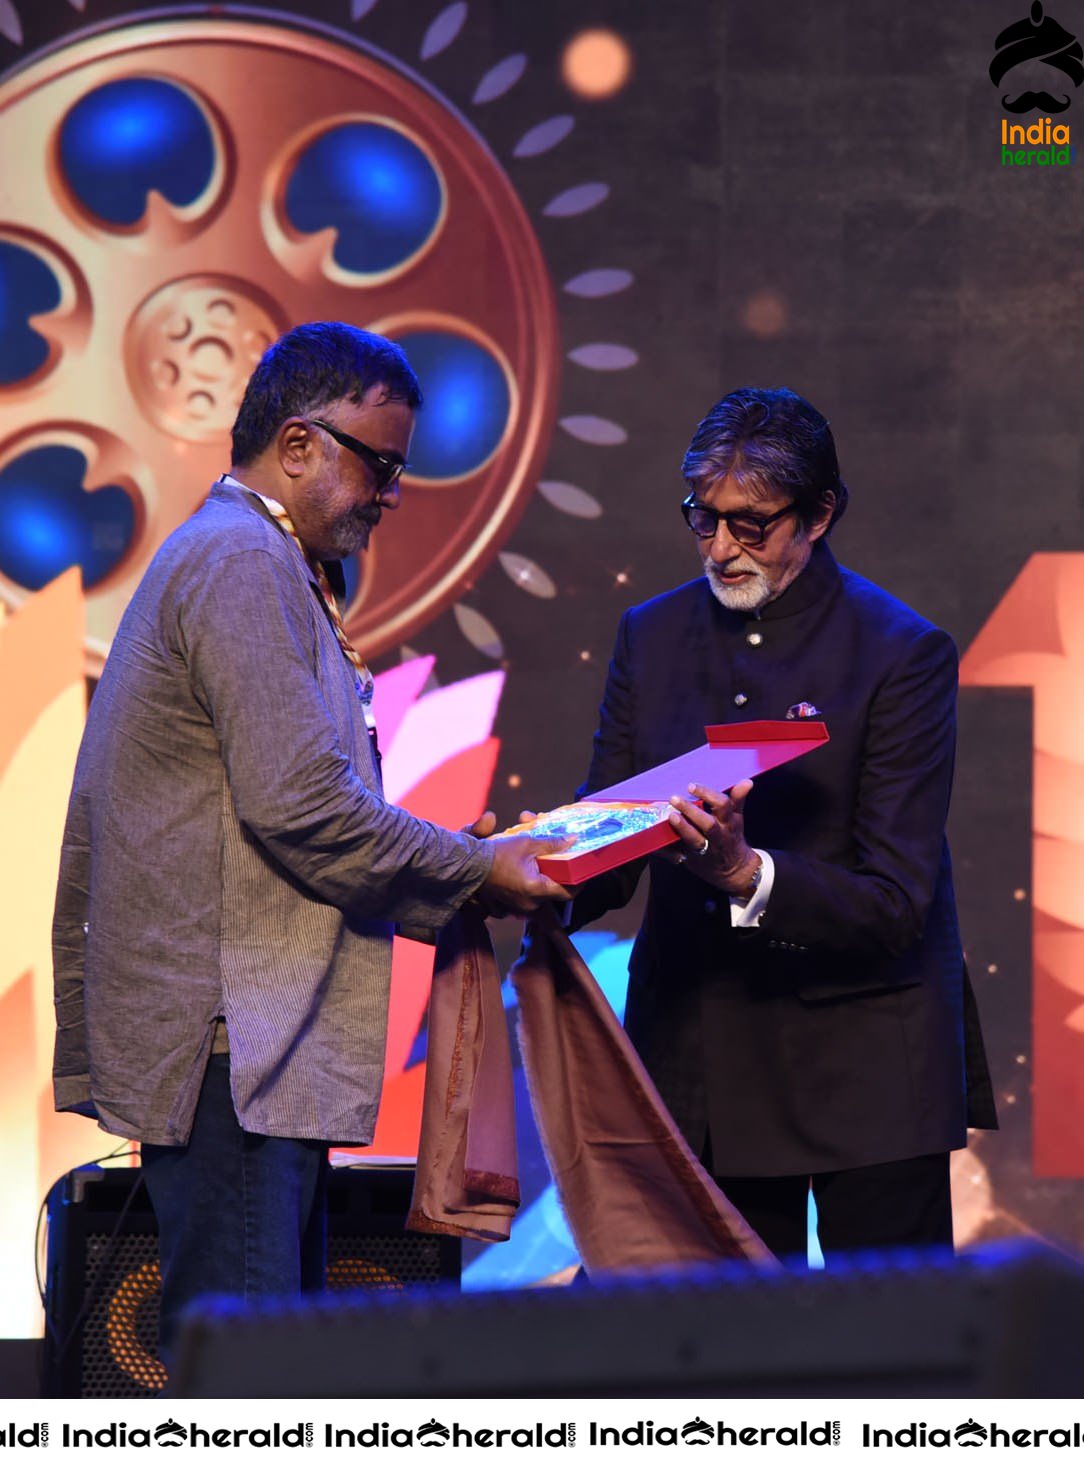 Ministry Of Information and Broadcasting honors Cinematographer PC Sreeram